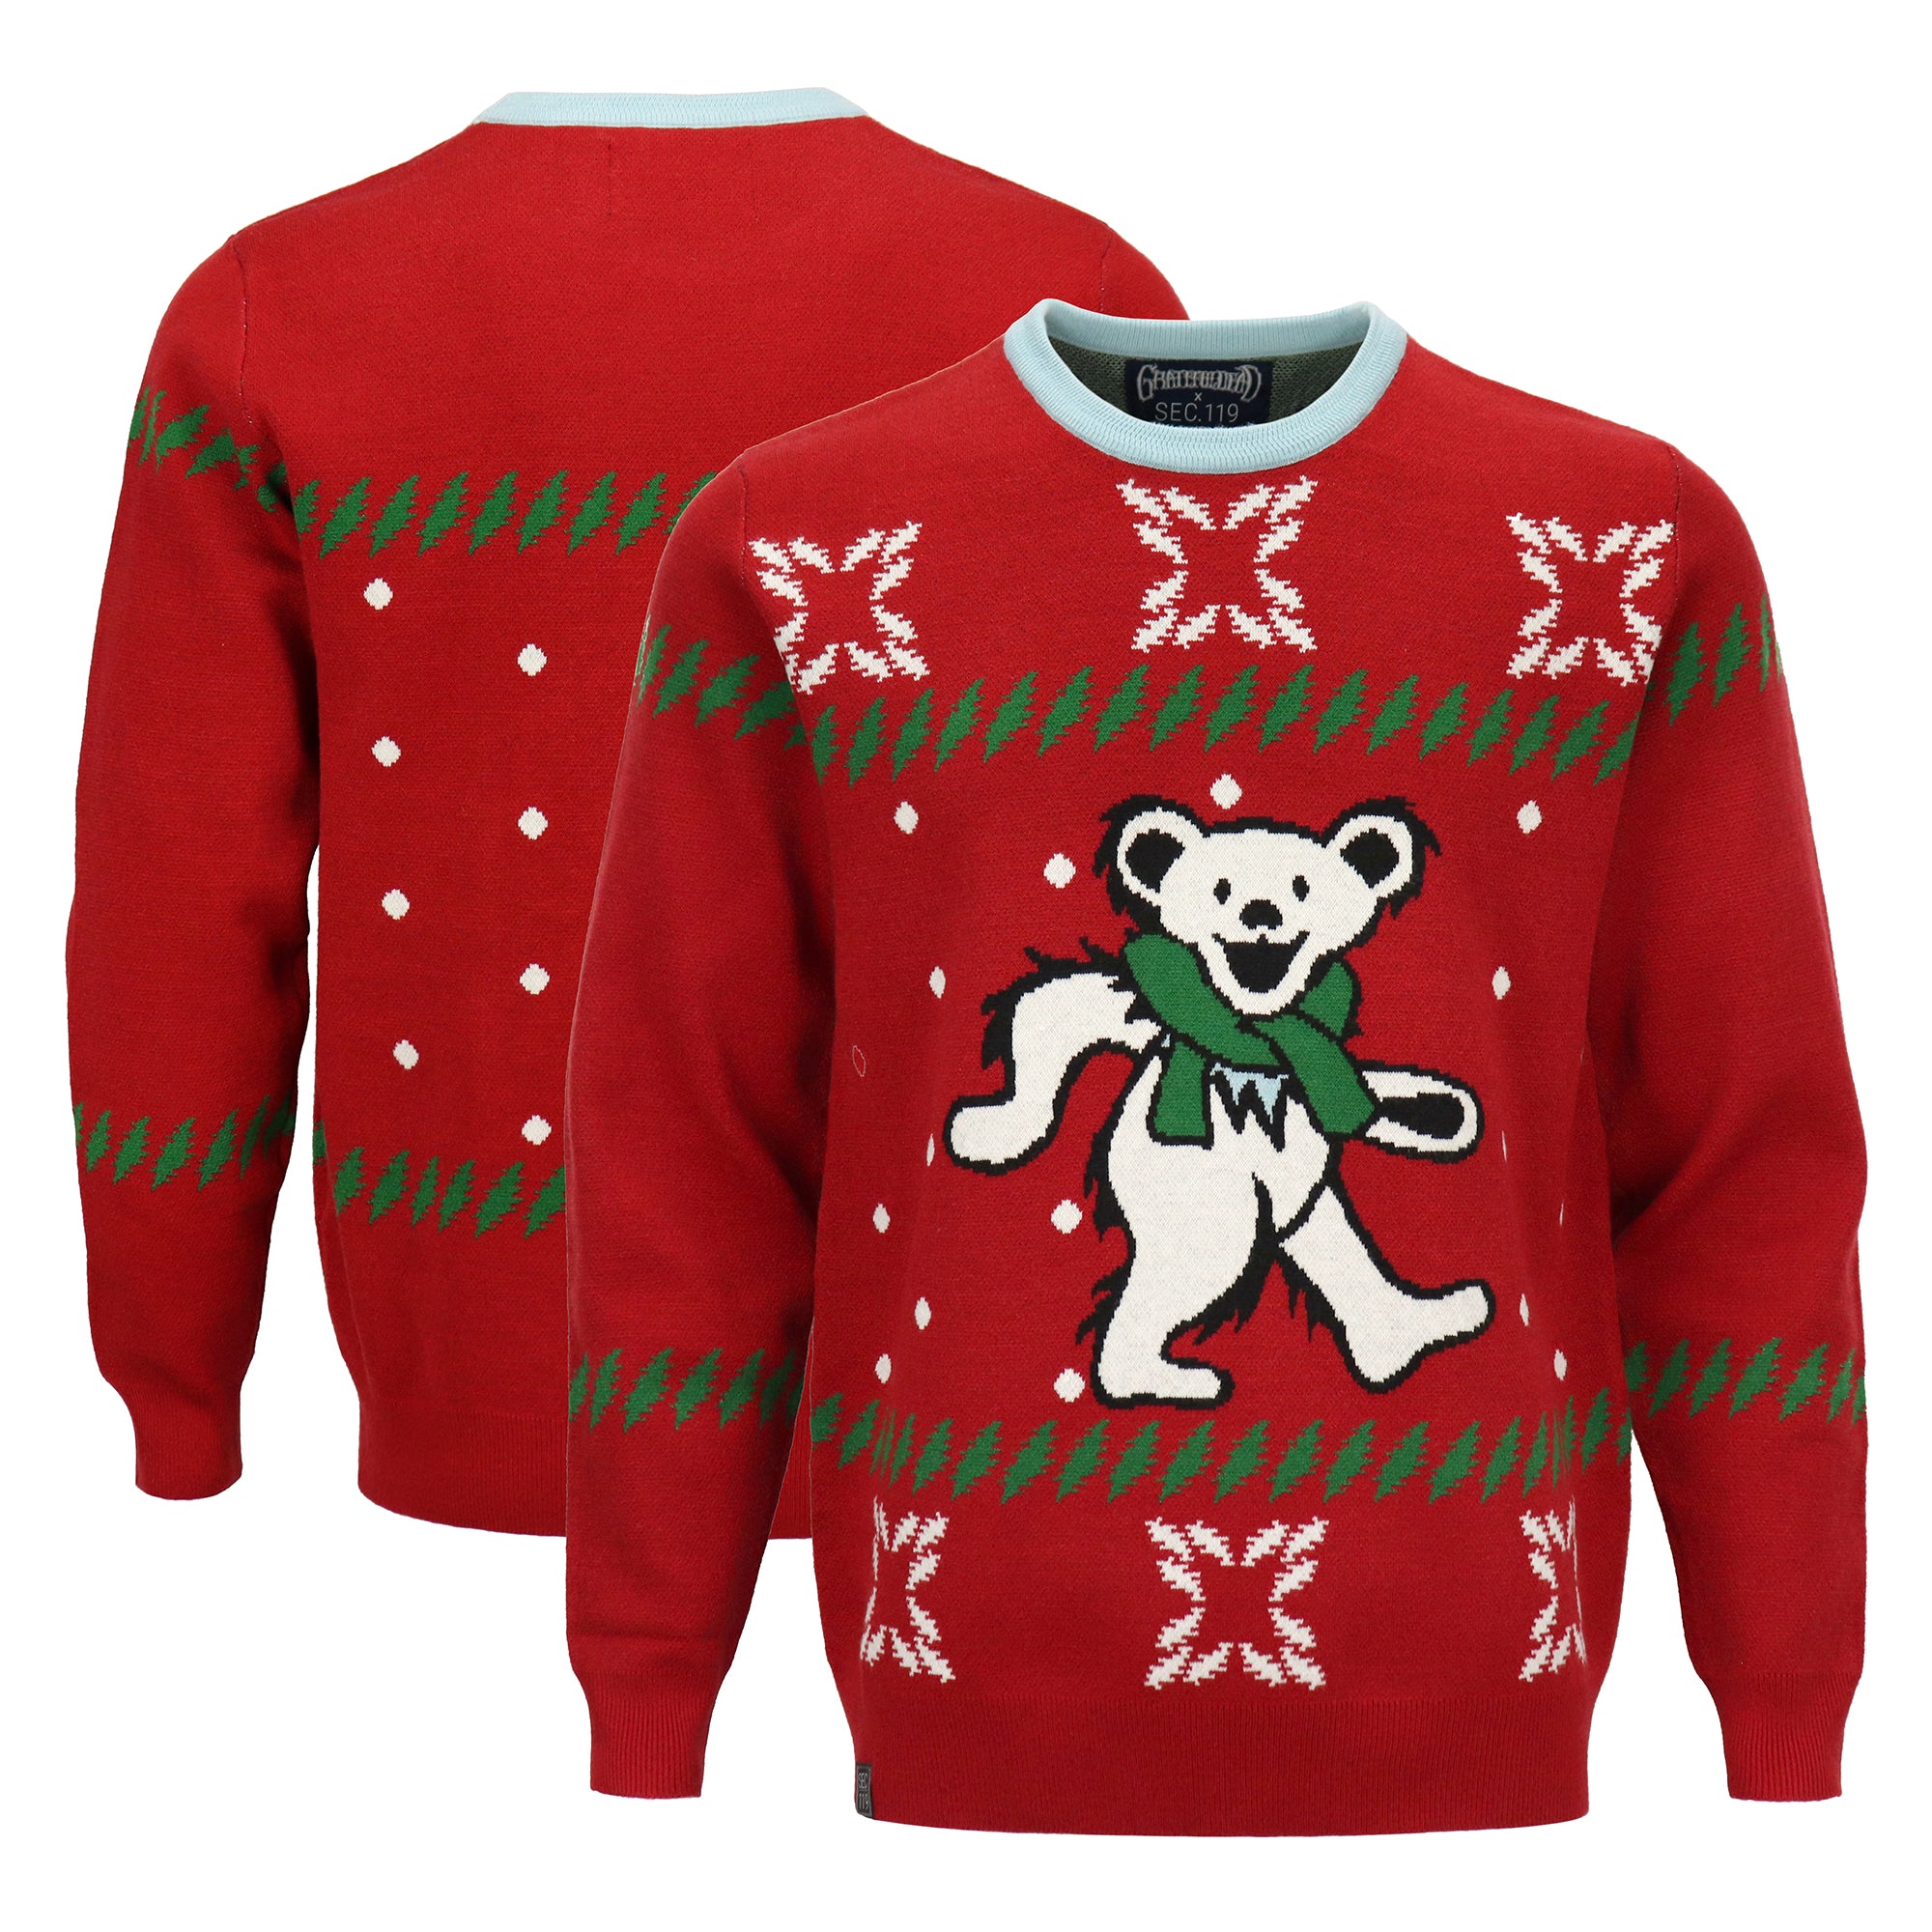 Grateful Dead Holiday Sweater Dancing Bear with Scarf - Section 119